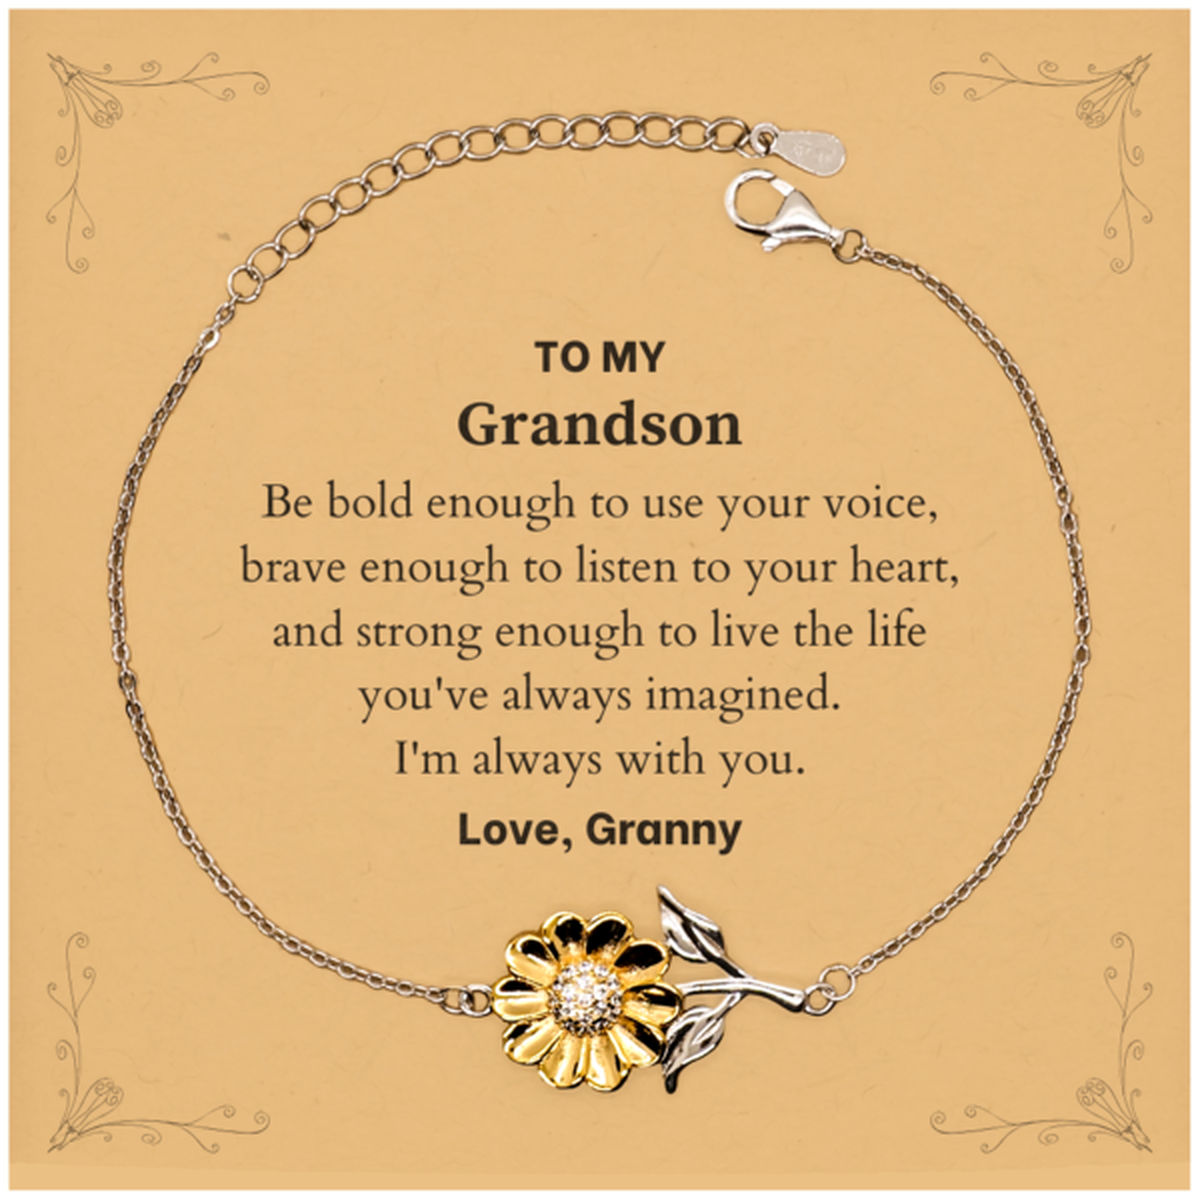 Keepsake Grandson Sunflower Bracelet Gift Idea Graduation Christmas Birthday Grandson from Granny, Grandson Be bold enough to use your voice, brave enough to listen to your heart. Love, Granny